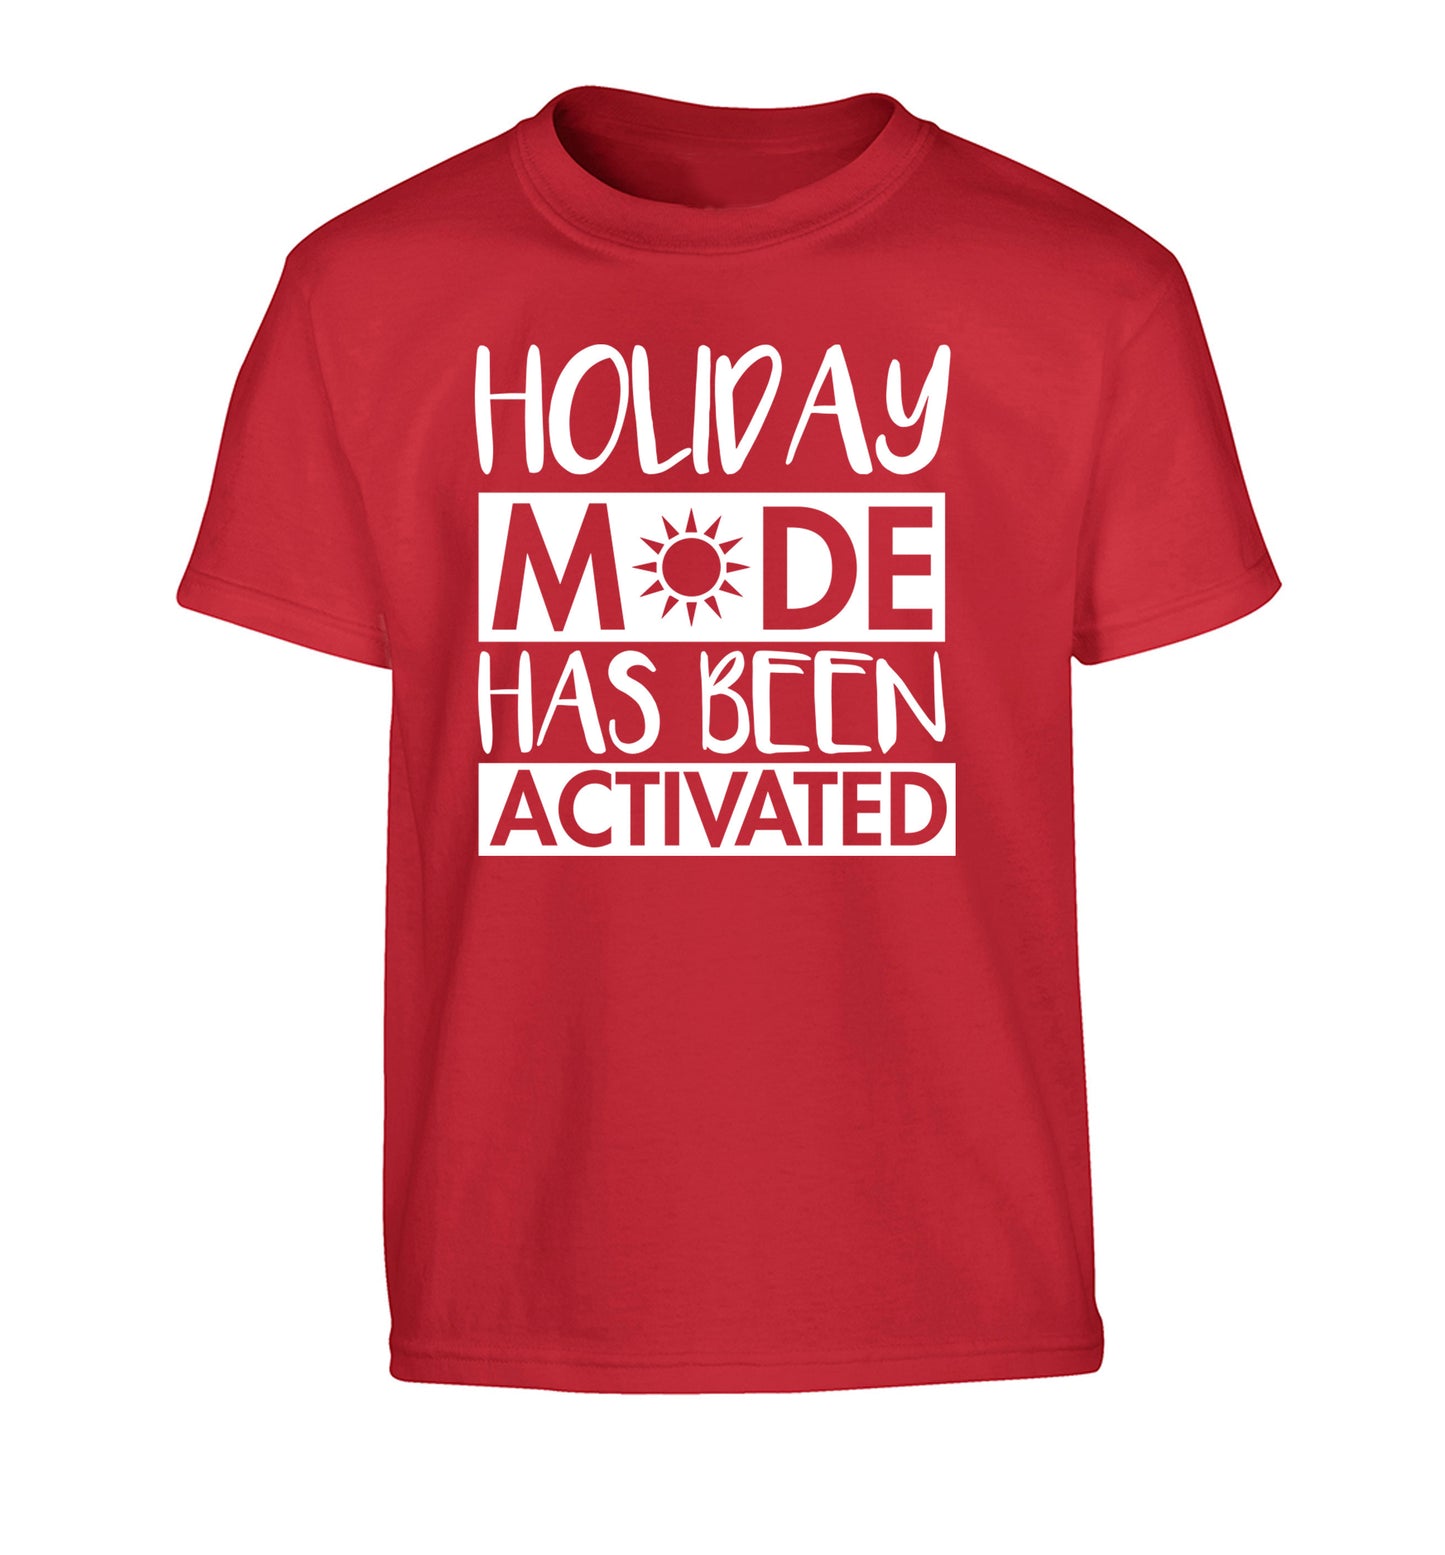 Holiday mode has been activated Children's red Tshirt 12-14 Years